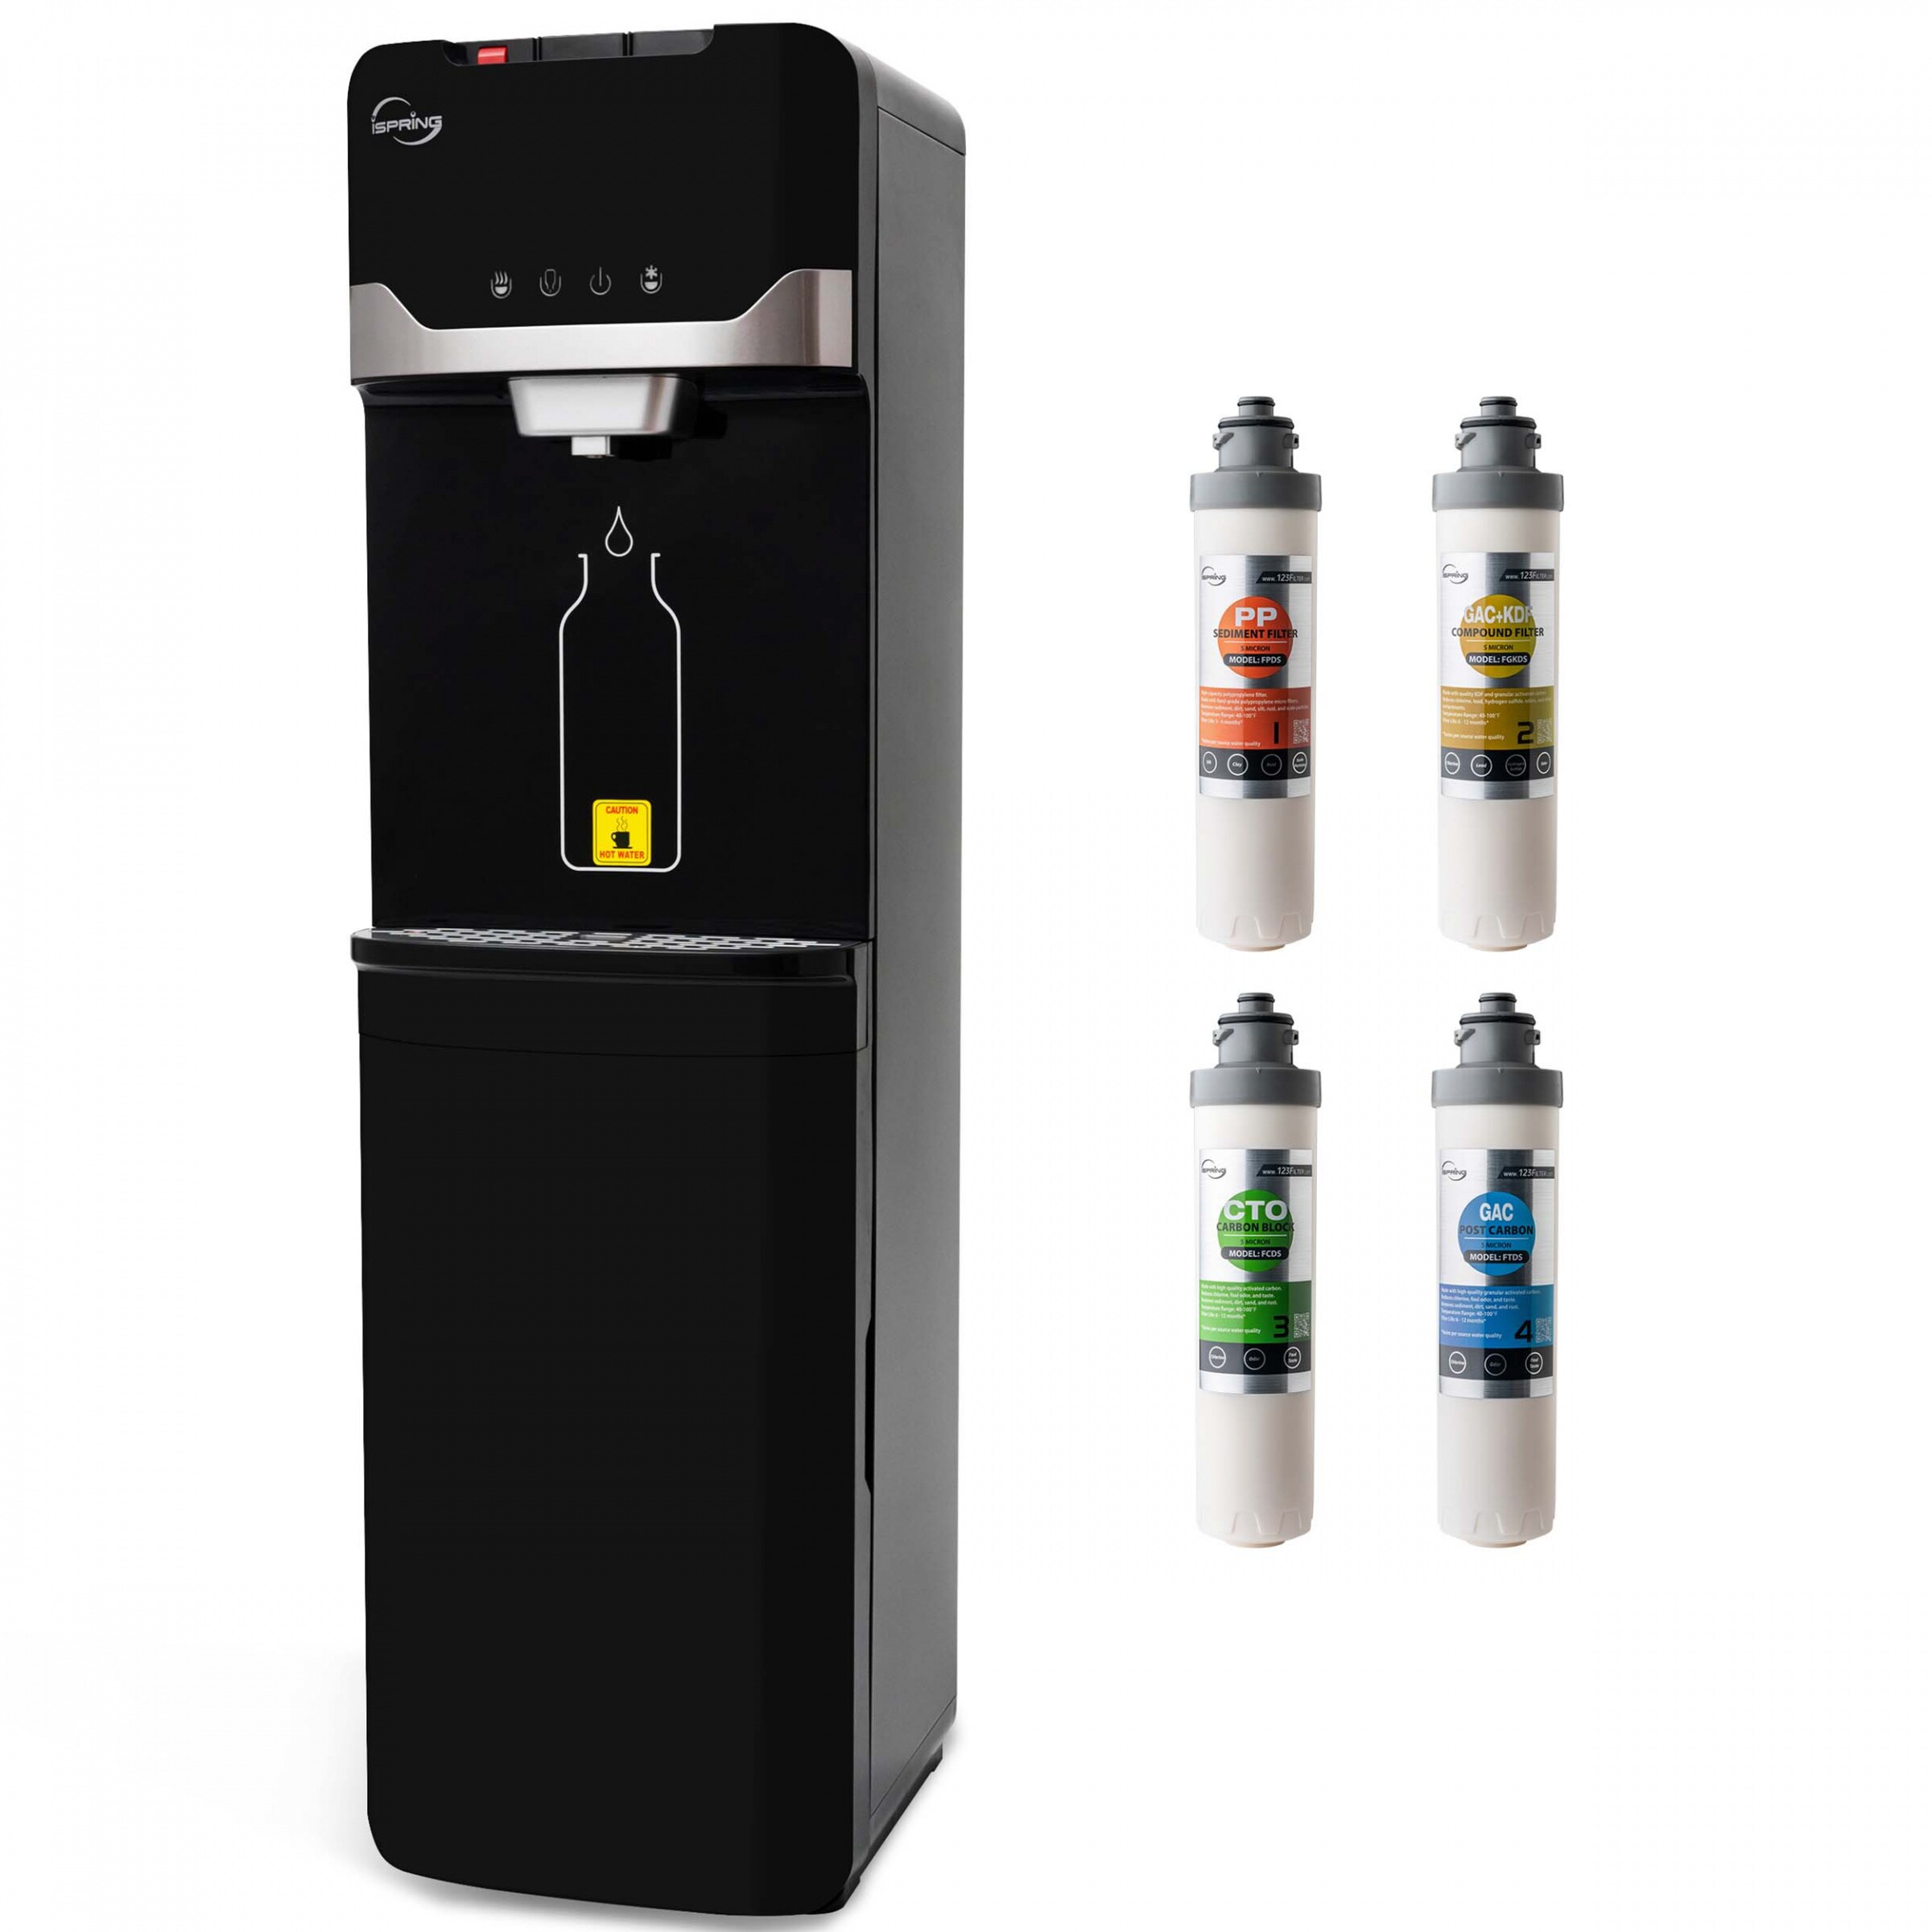 Brio Countertop Self Cleaning Bottleless Water Cooler Water Dispenser 2 Stage Water Filter Included 